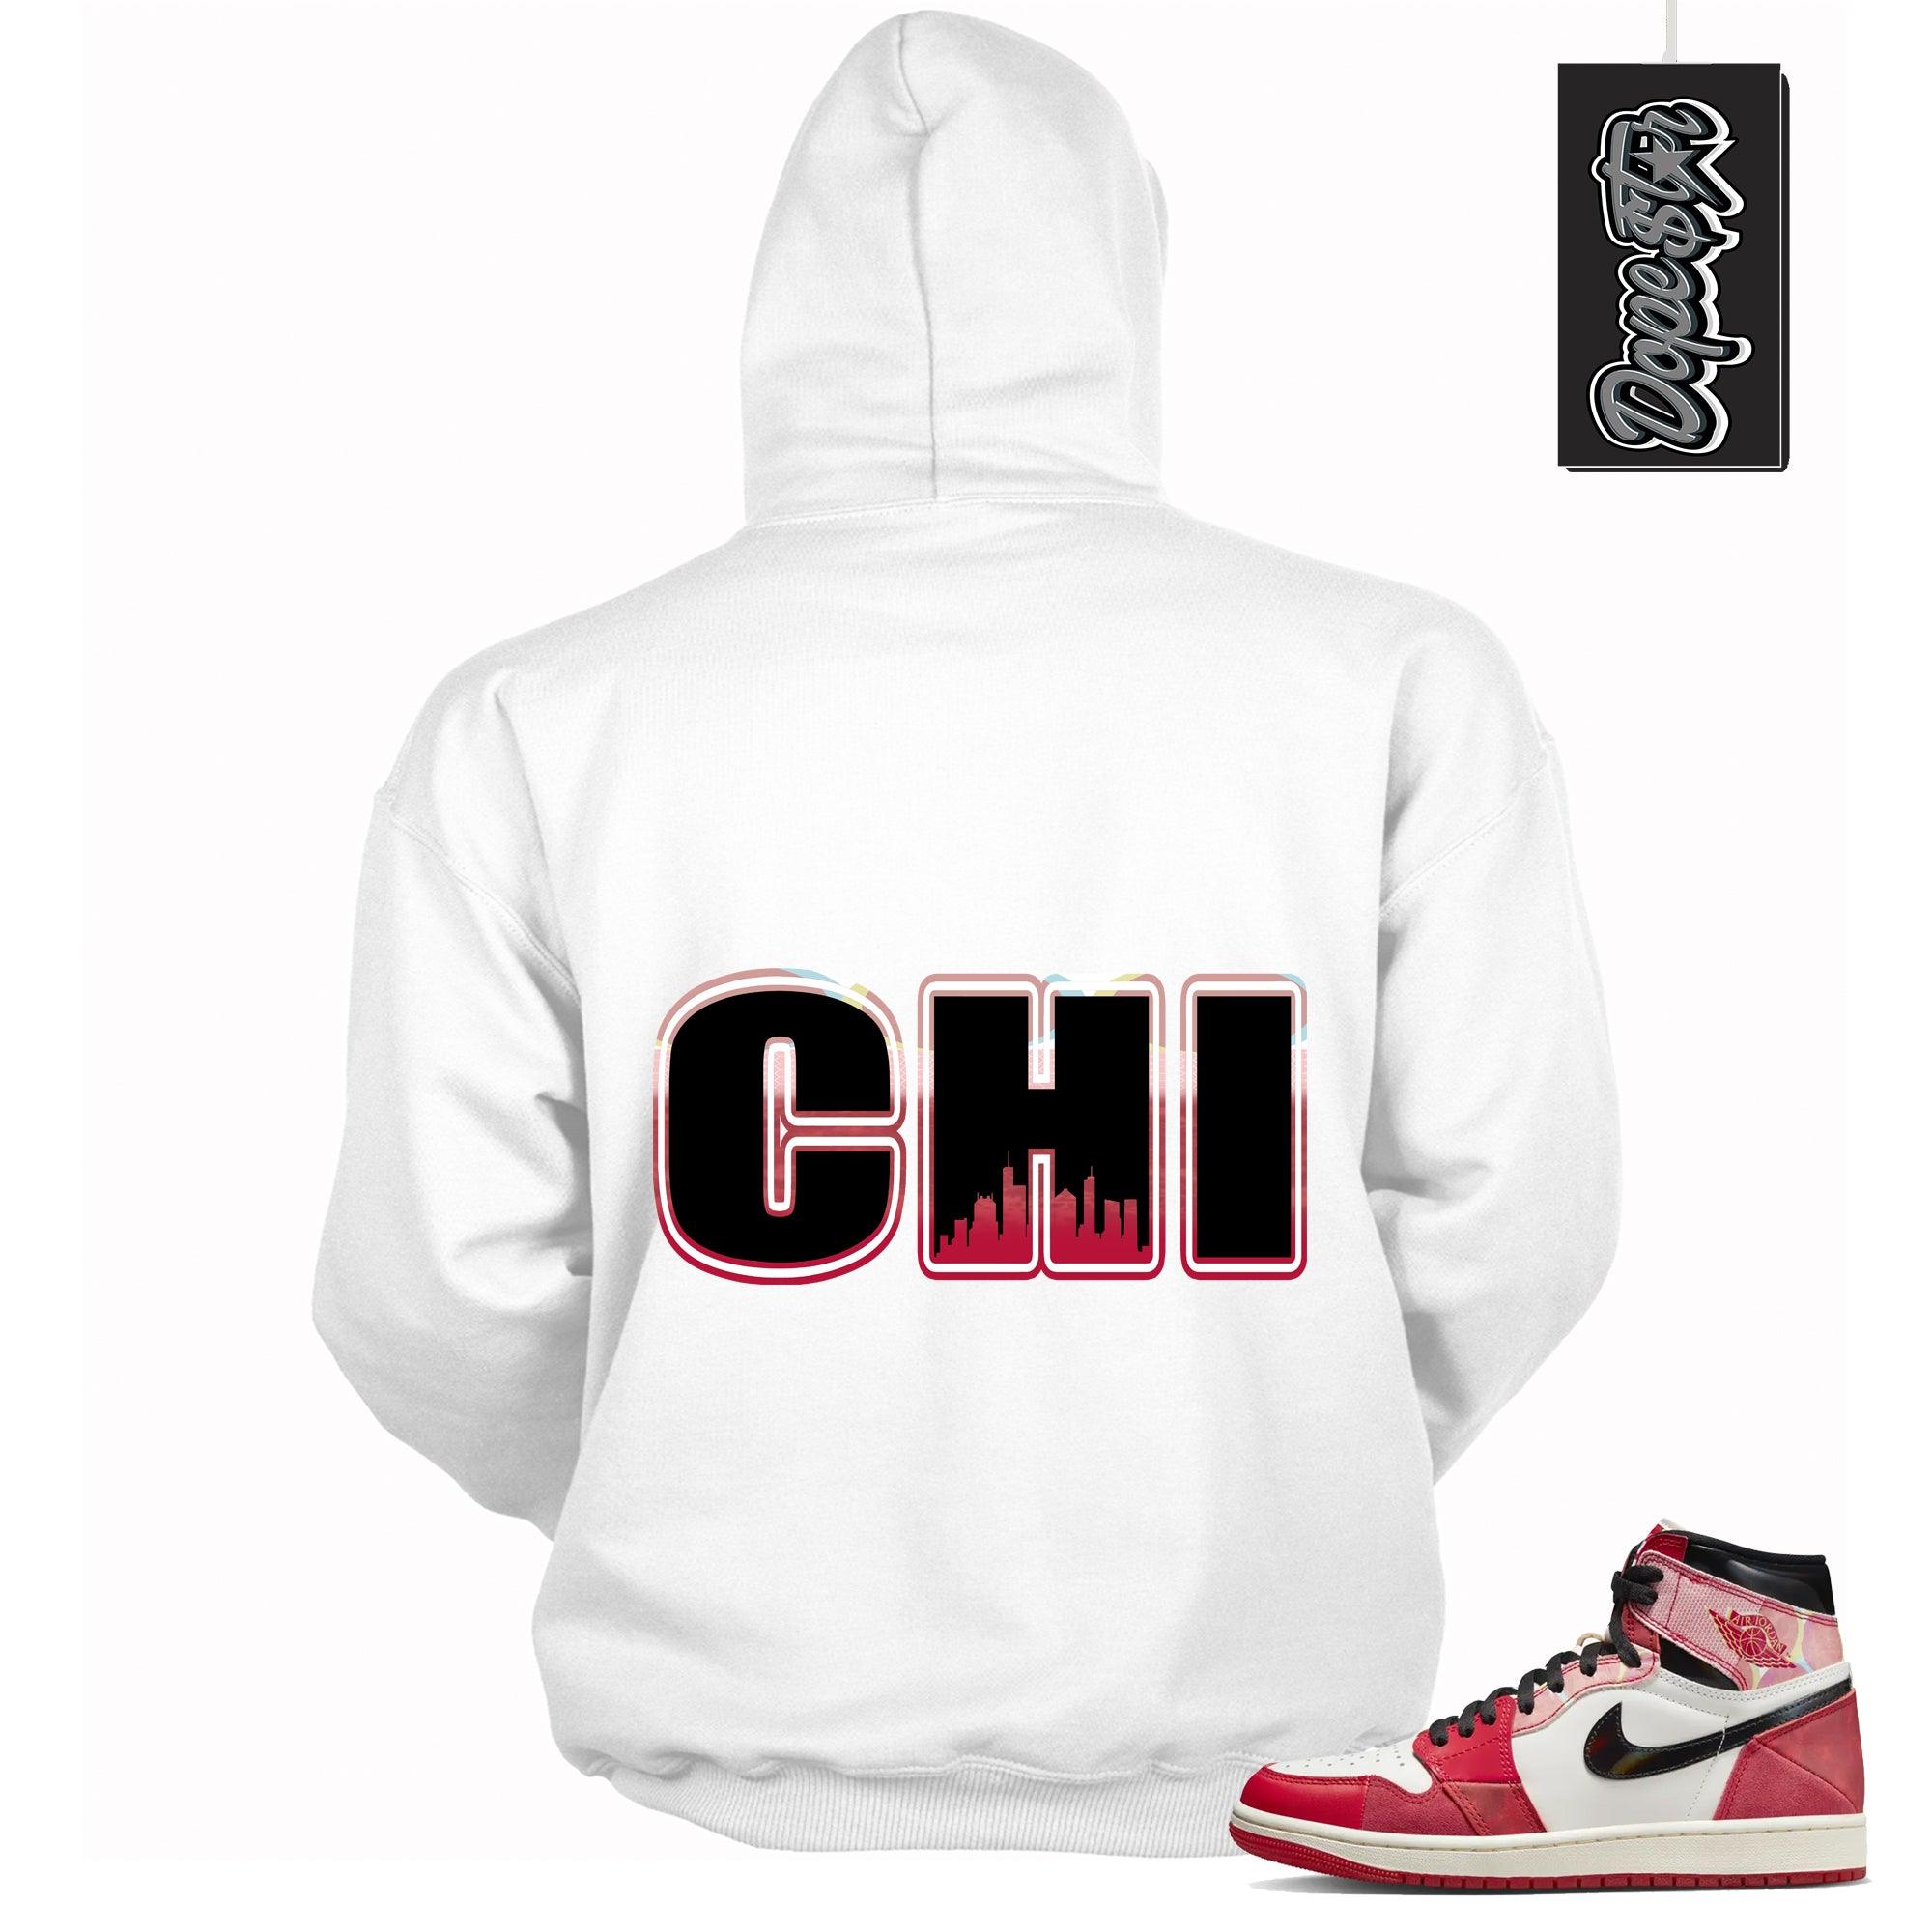 Cool White Graphic Hoodie with “ Chicago “ print, that perfectly matches AIR JORDAN 1 Retro High OG NEXT CHAPTER SPIDER-VERSE sneakers